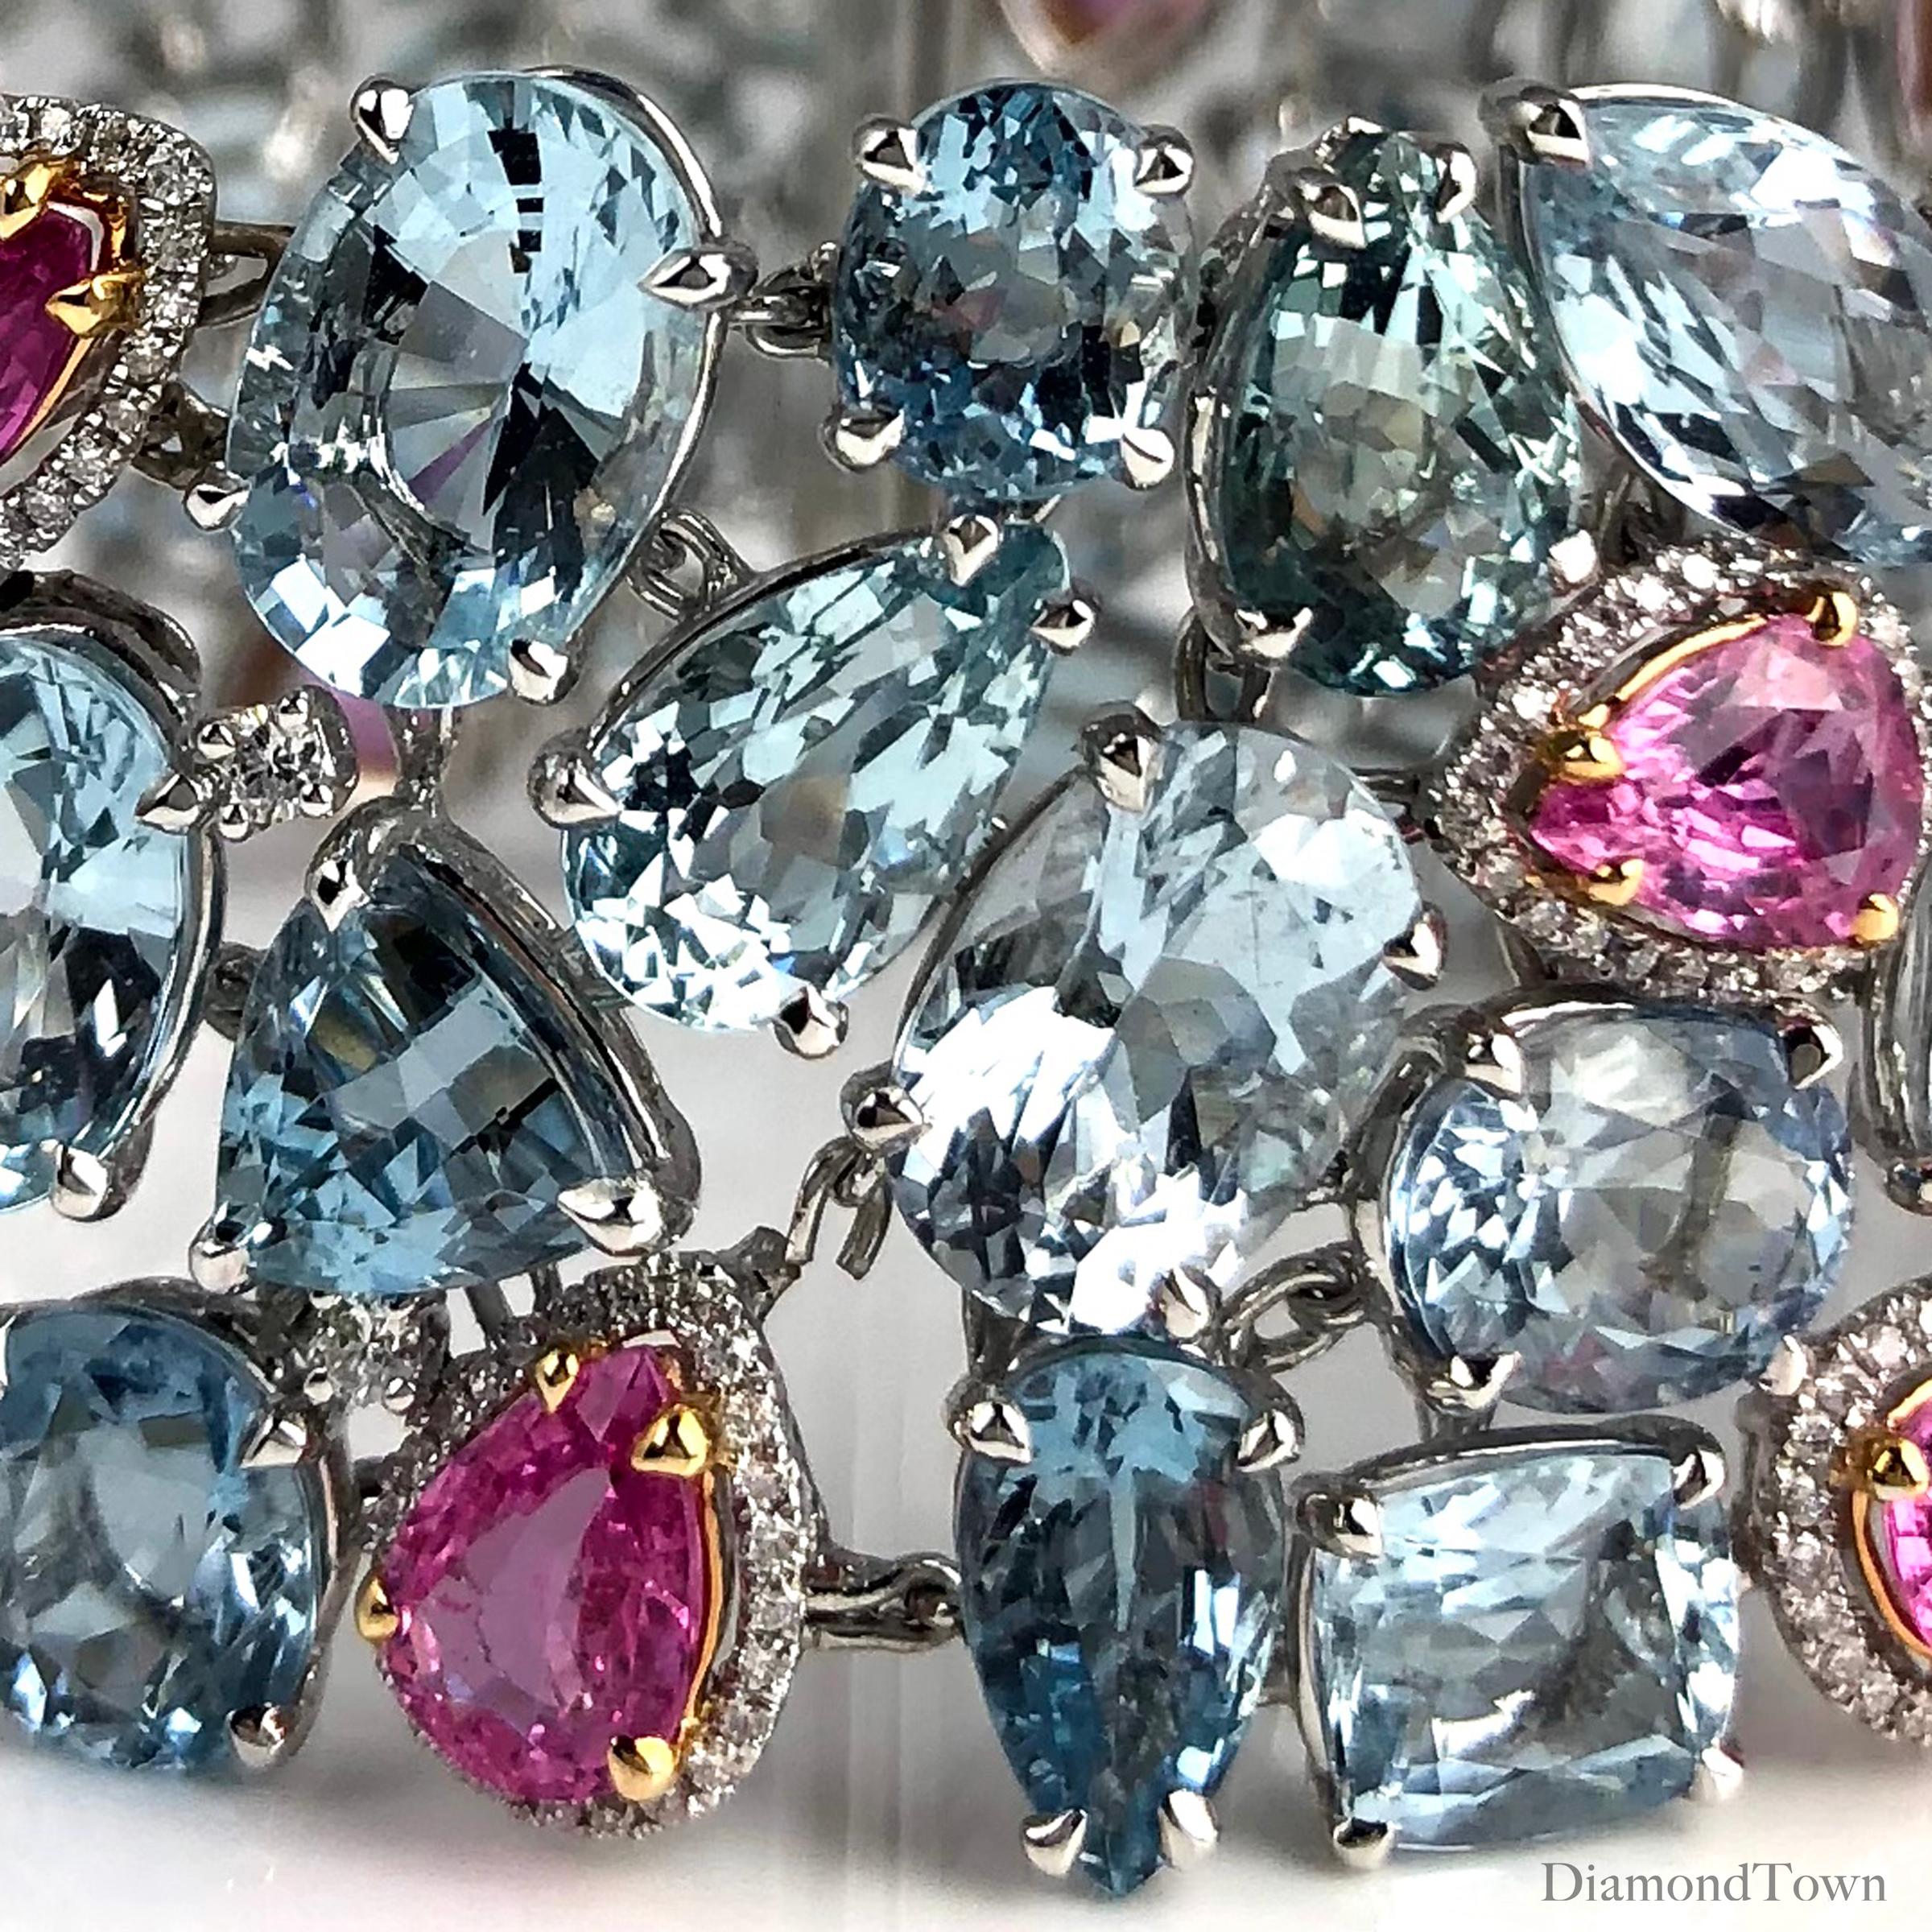 This gorgeous bracelet features GIA Certified aquamarine and pink sapphires, with diamond accents throughout. The stones are delicately arranged into a flexible cuff setting. A gorgeous color accompaniment to any event.

Aquamarine: 96.43